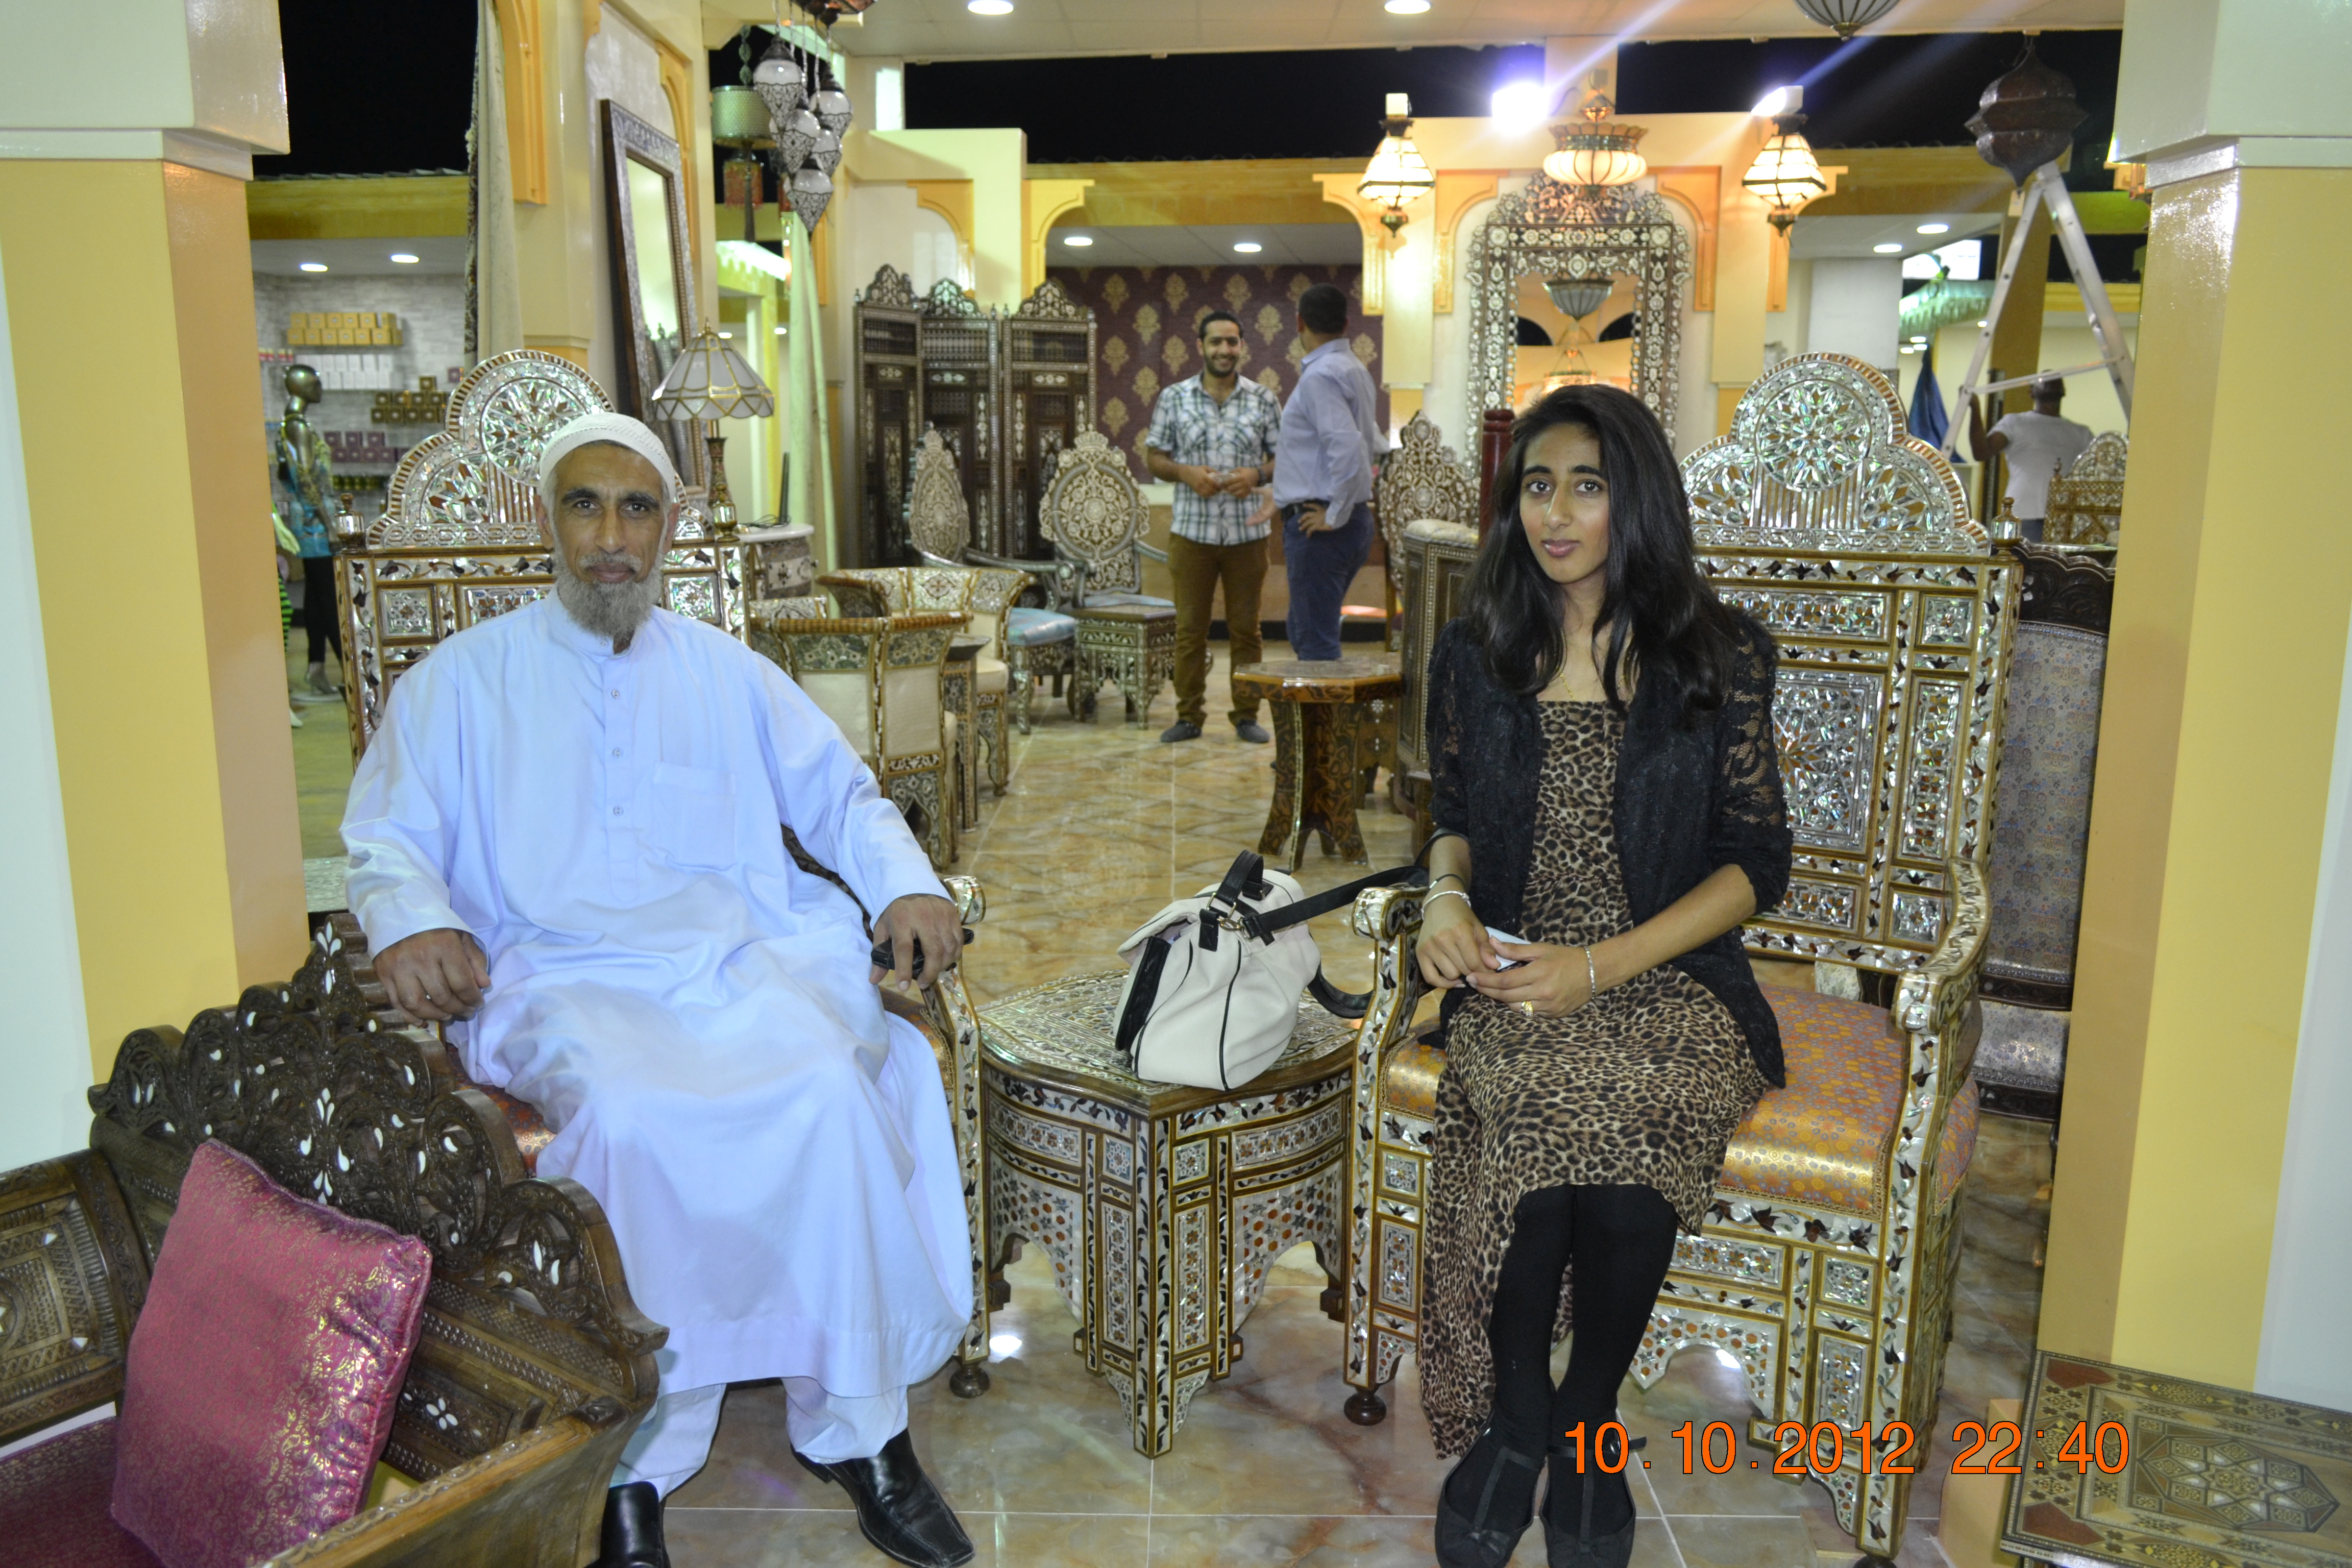 A few pictures at Global Village